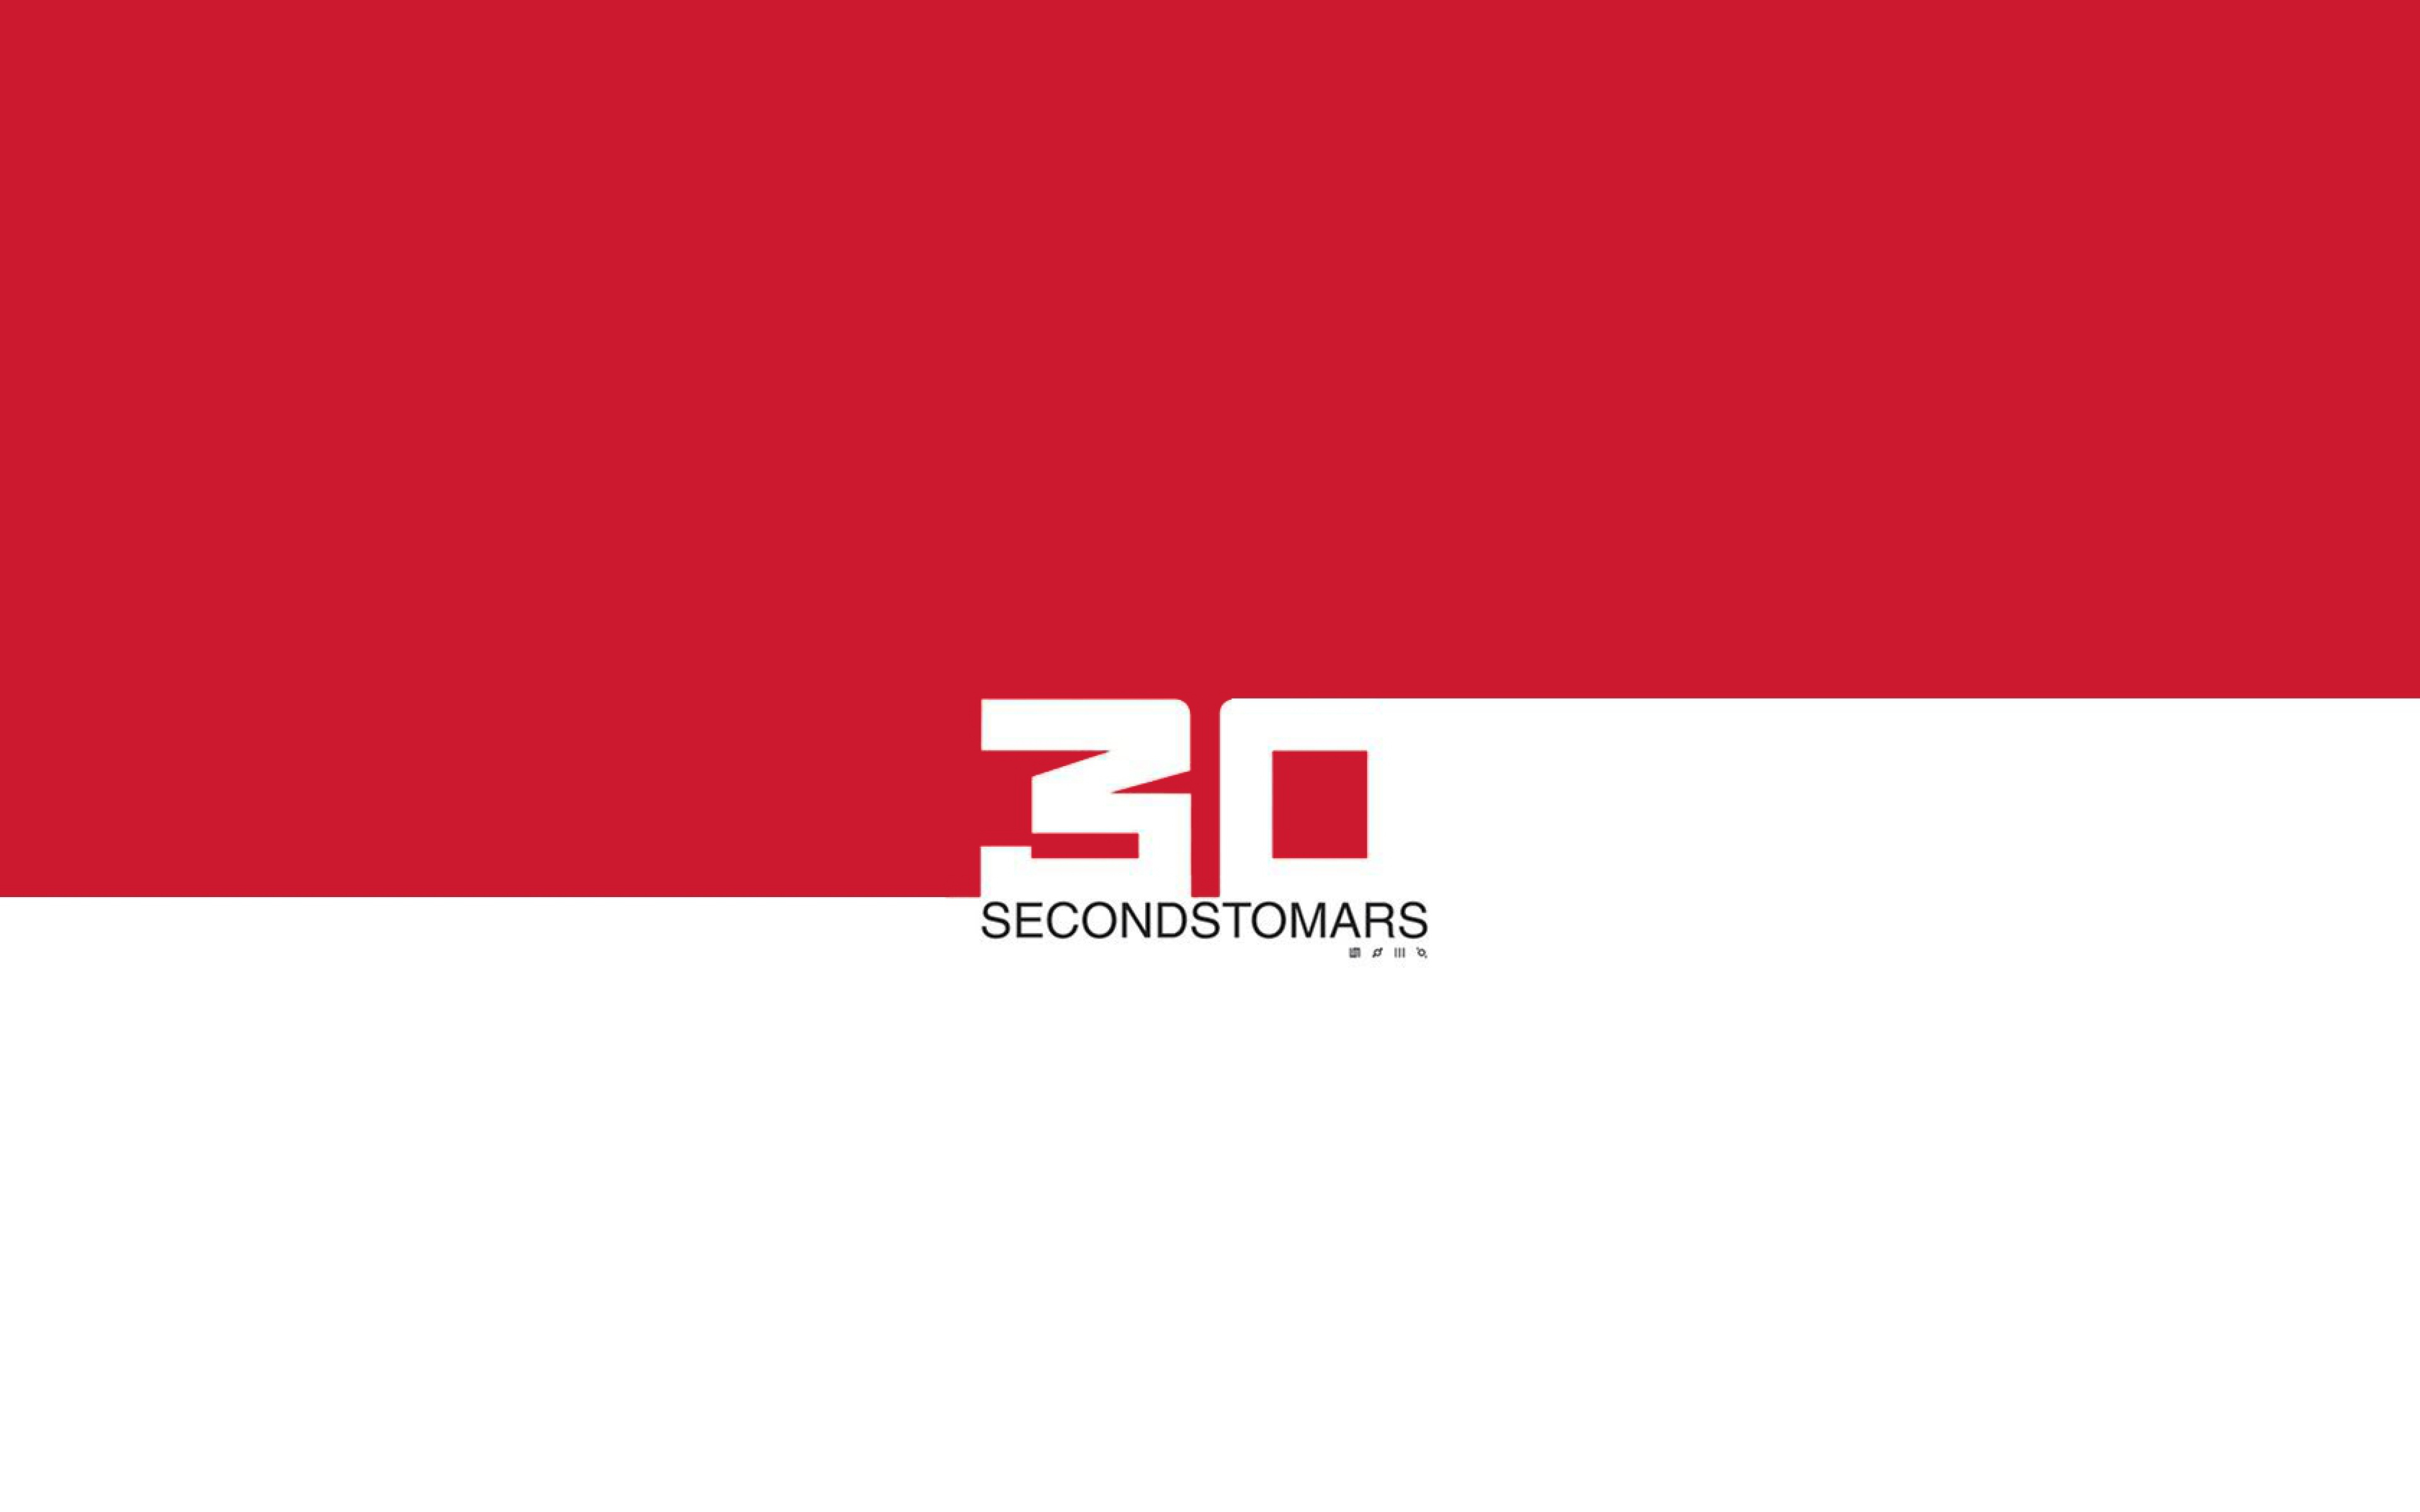 thirty seconds to mars, music, american, rock band